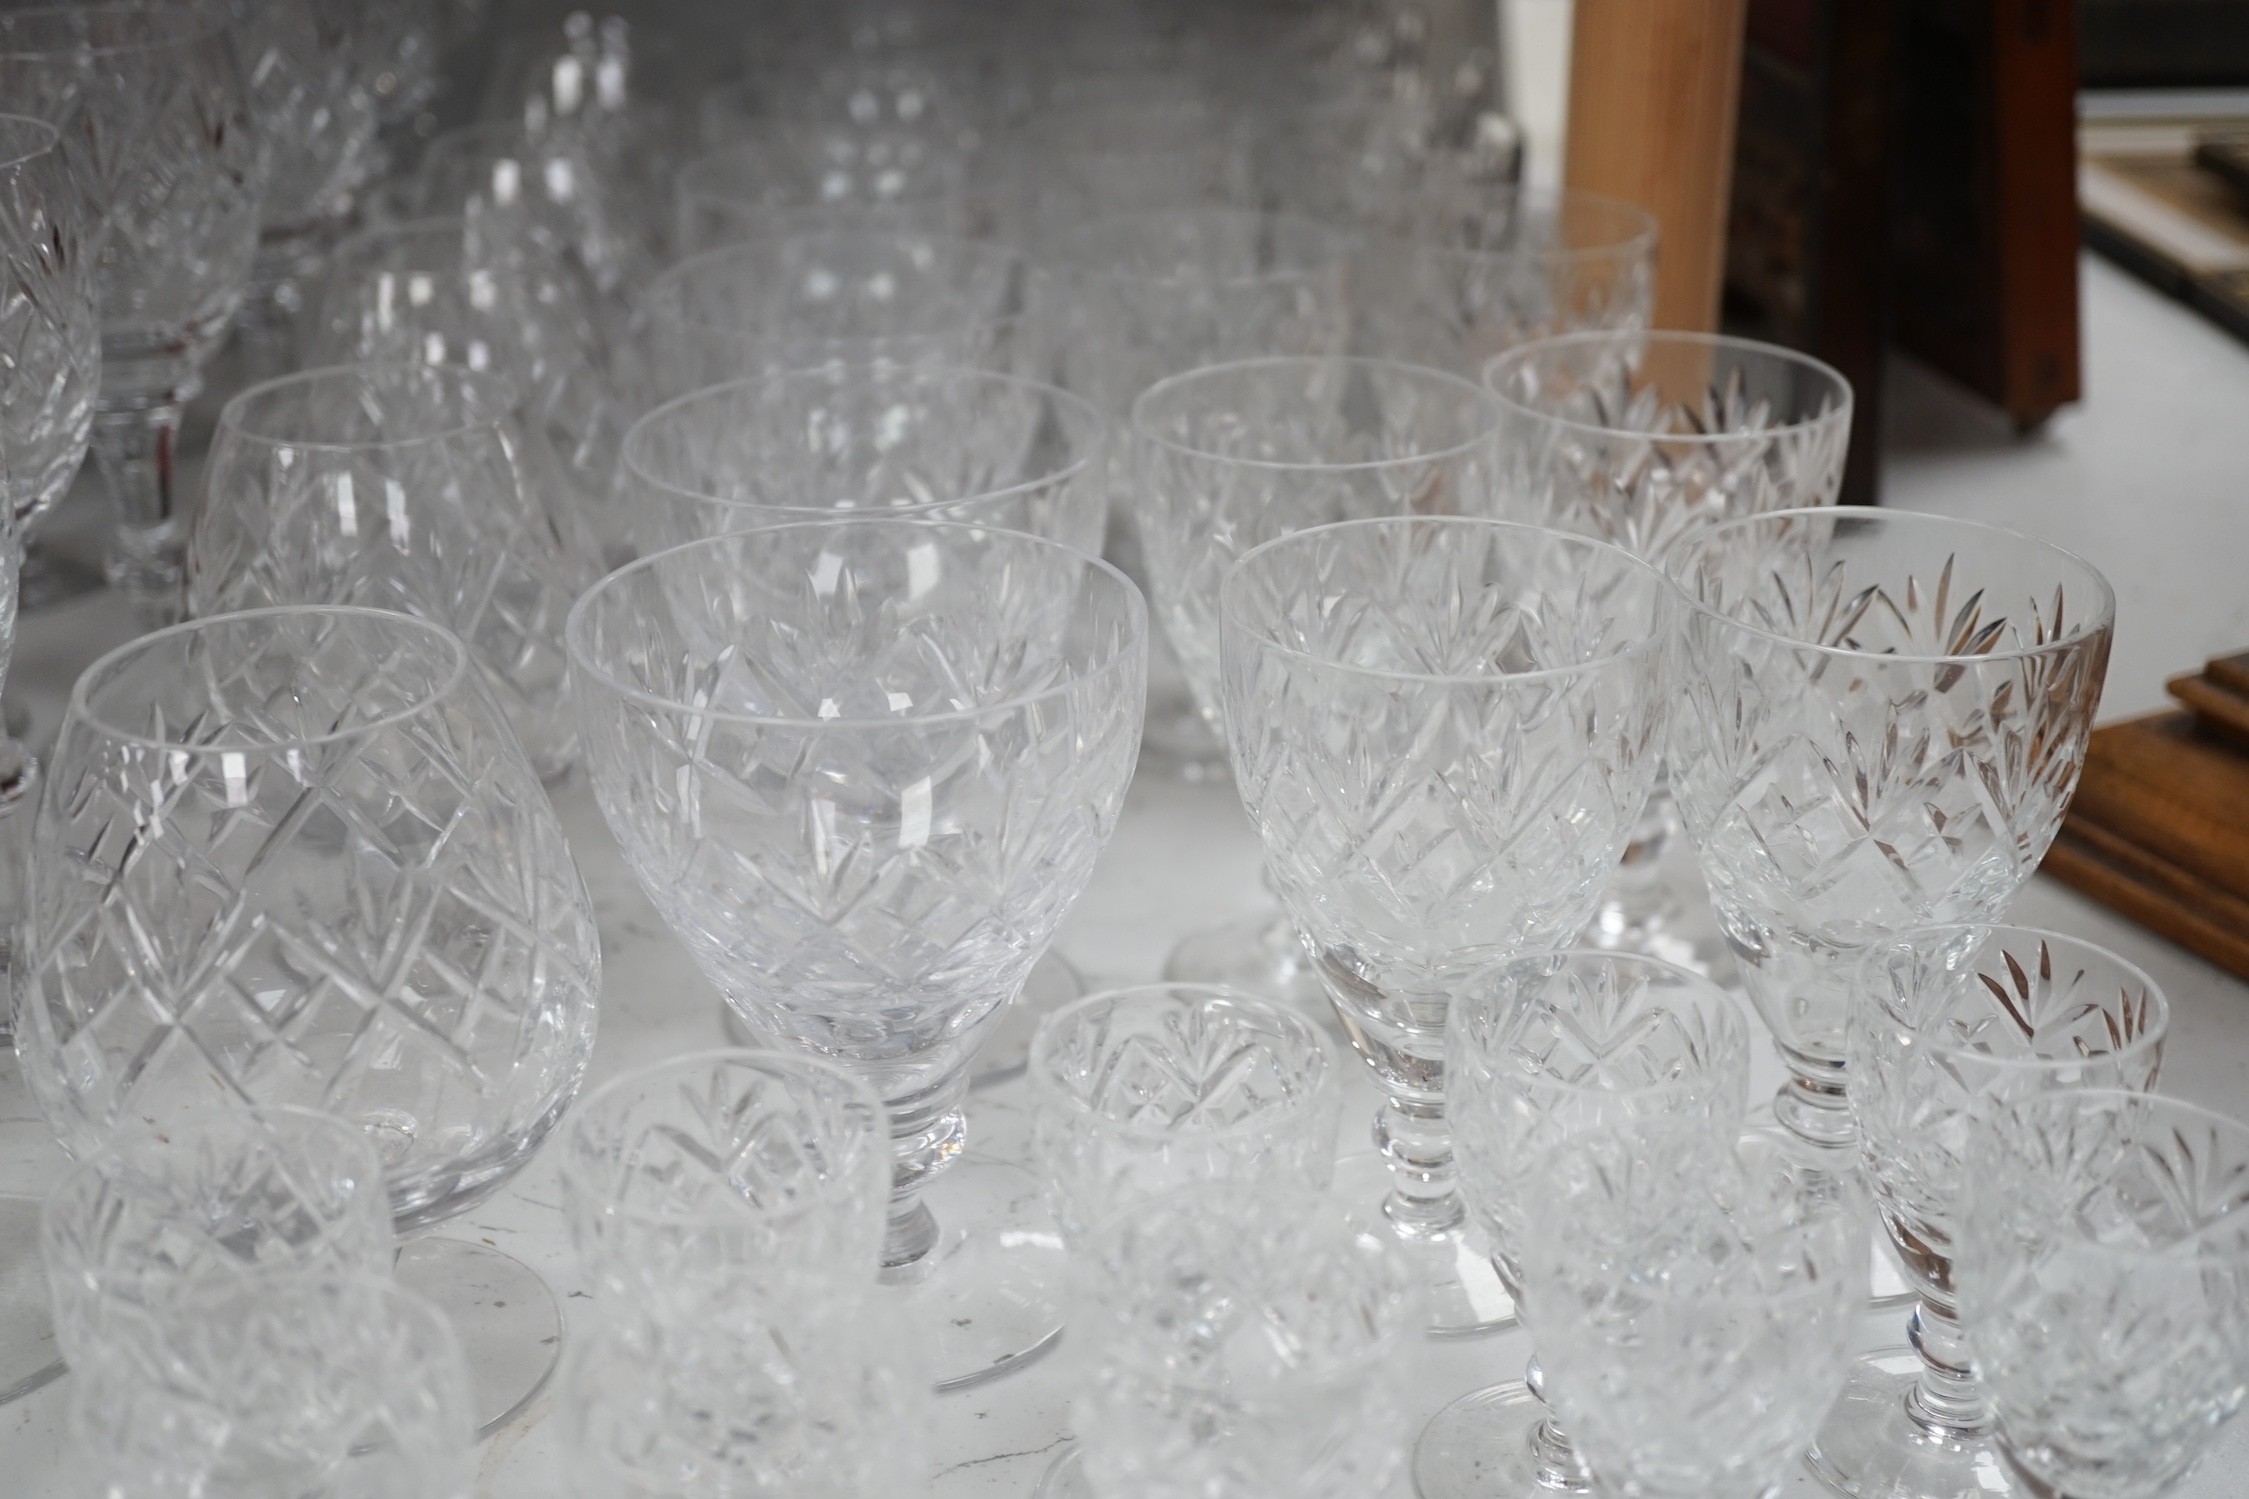 A collection of Royal Doulton glassware, to include: wine glasses, brandy balloons, etc. - Image 9 of 10